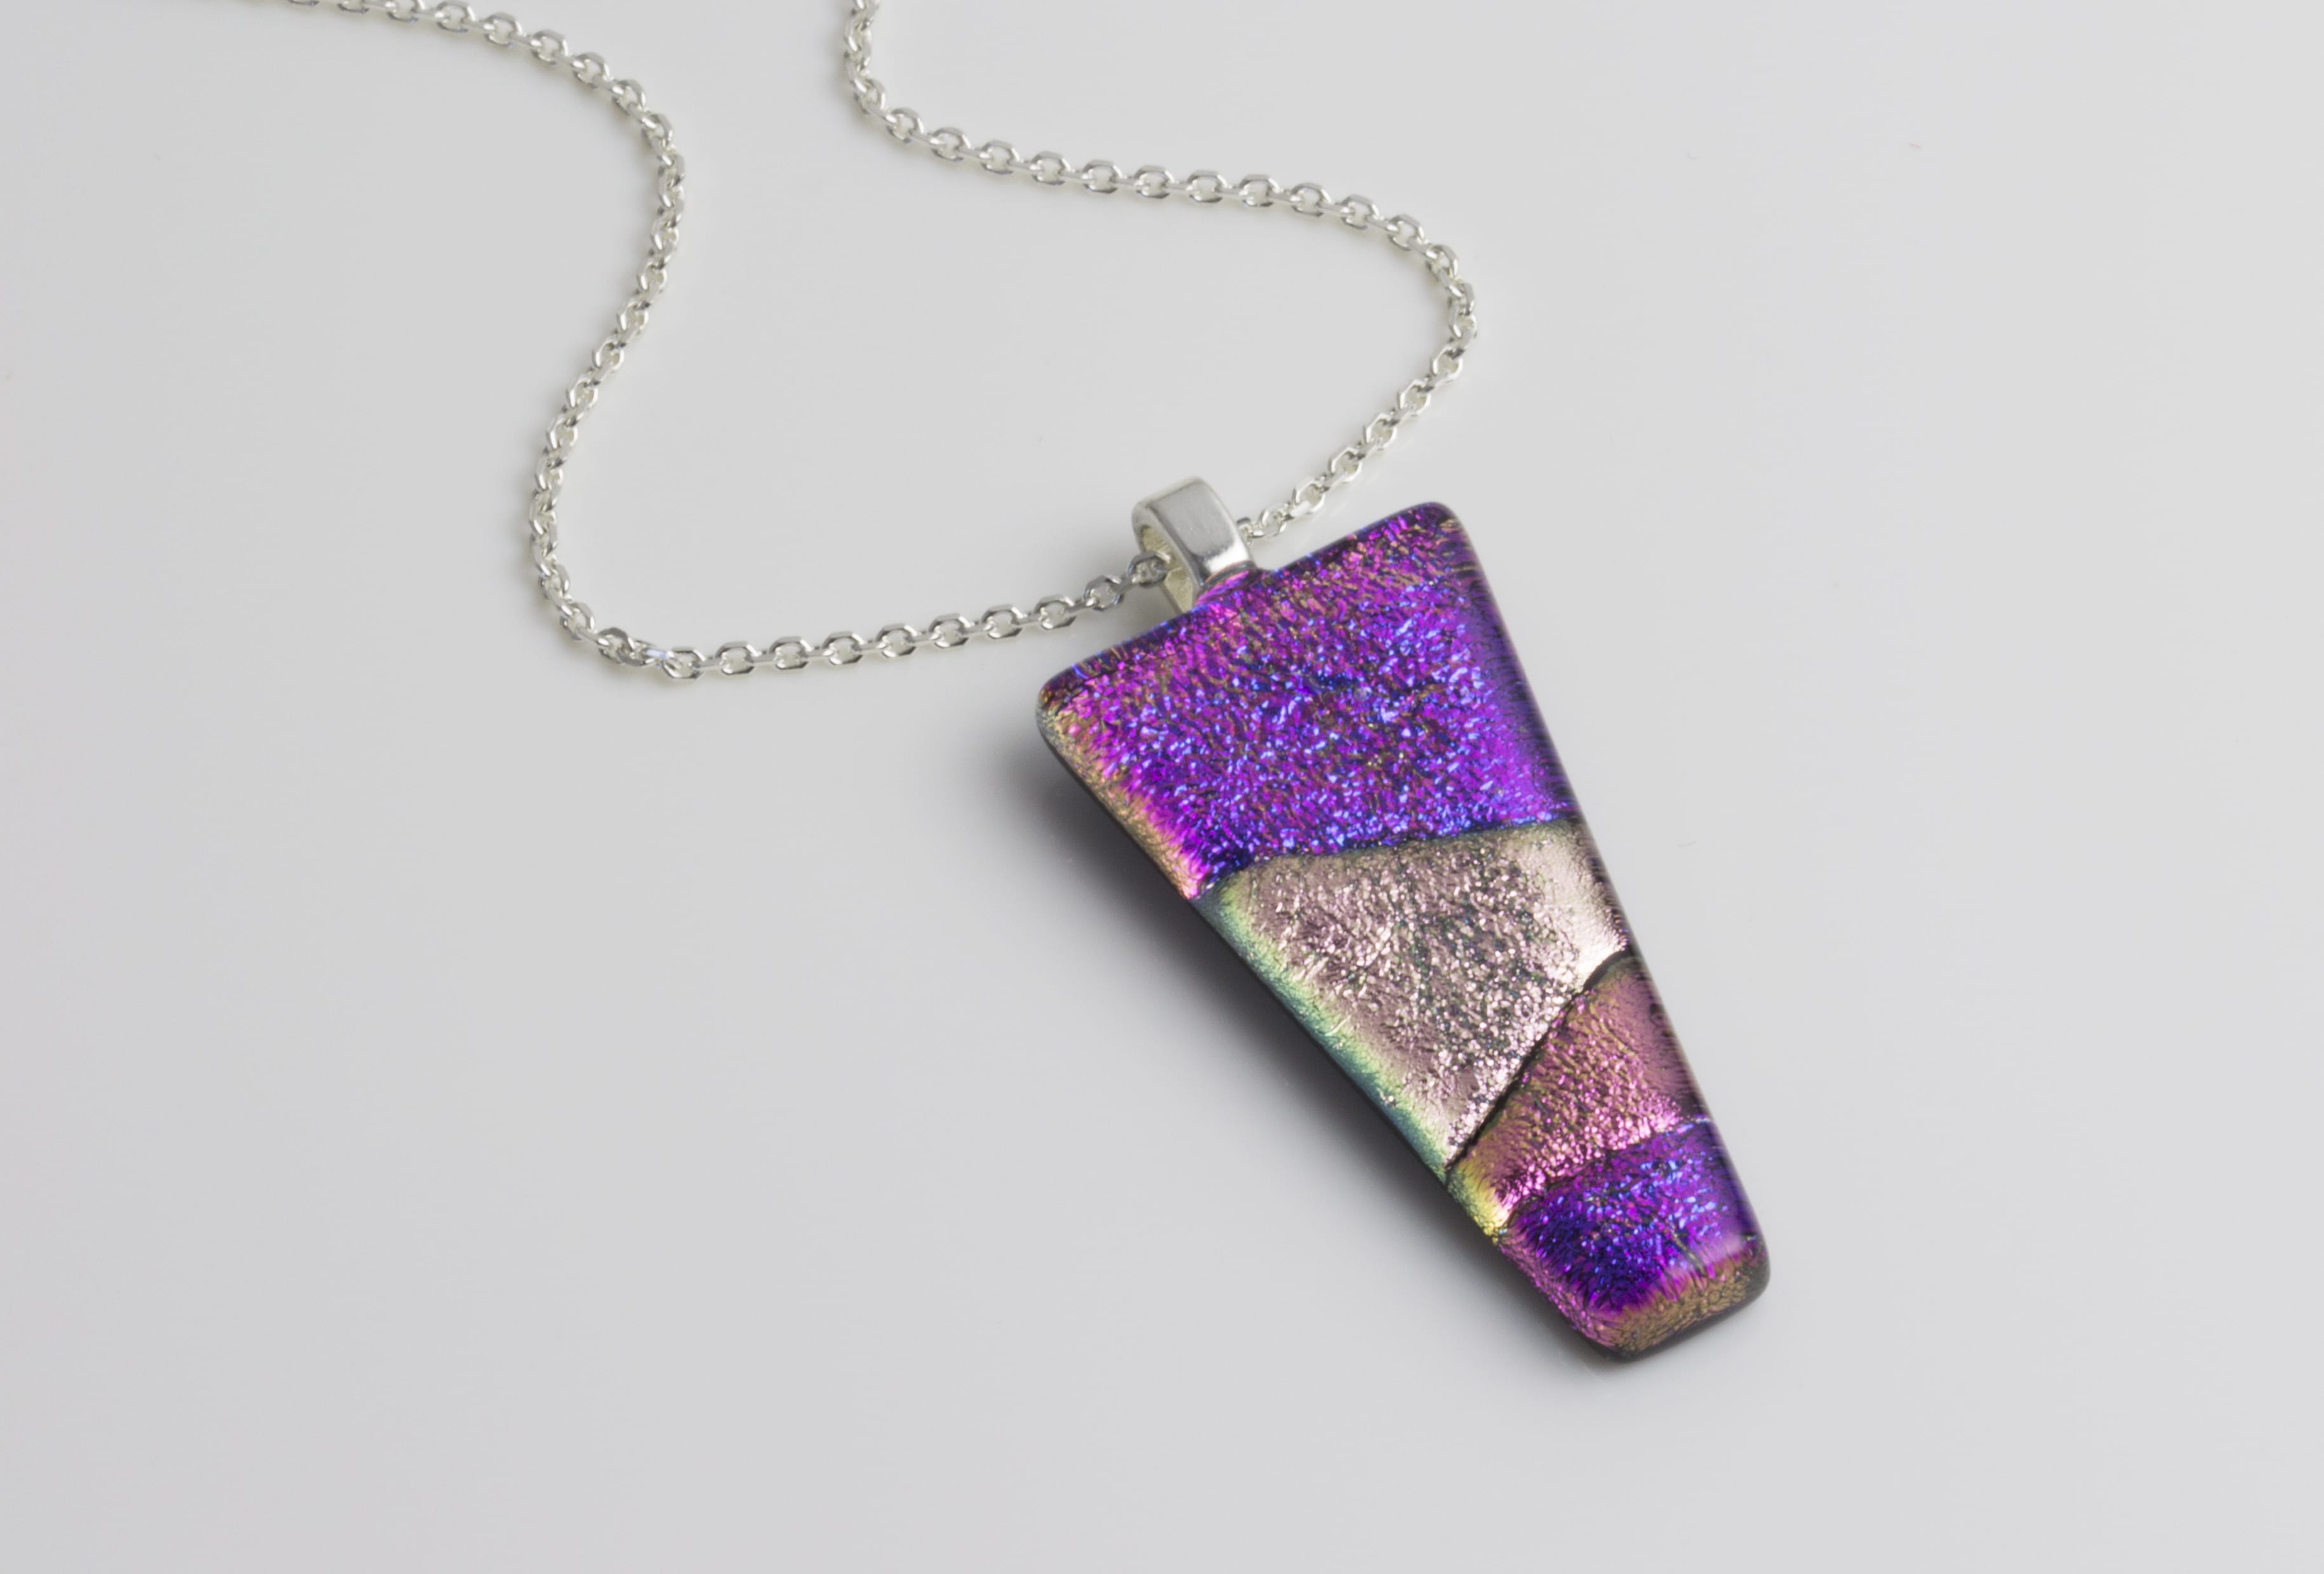 Pink glass pendant necklace made in the UK